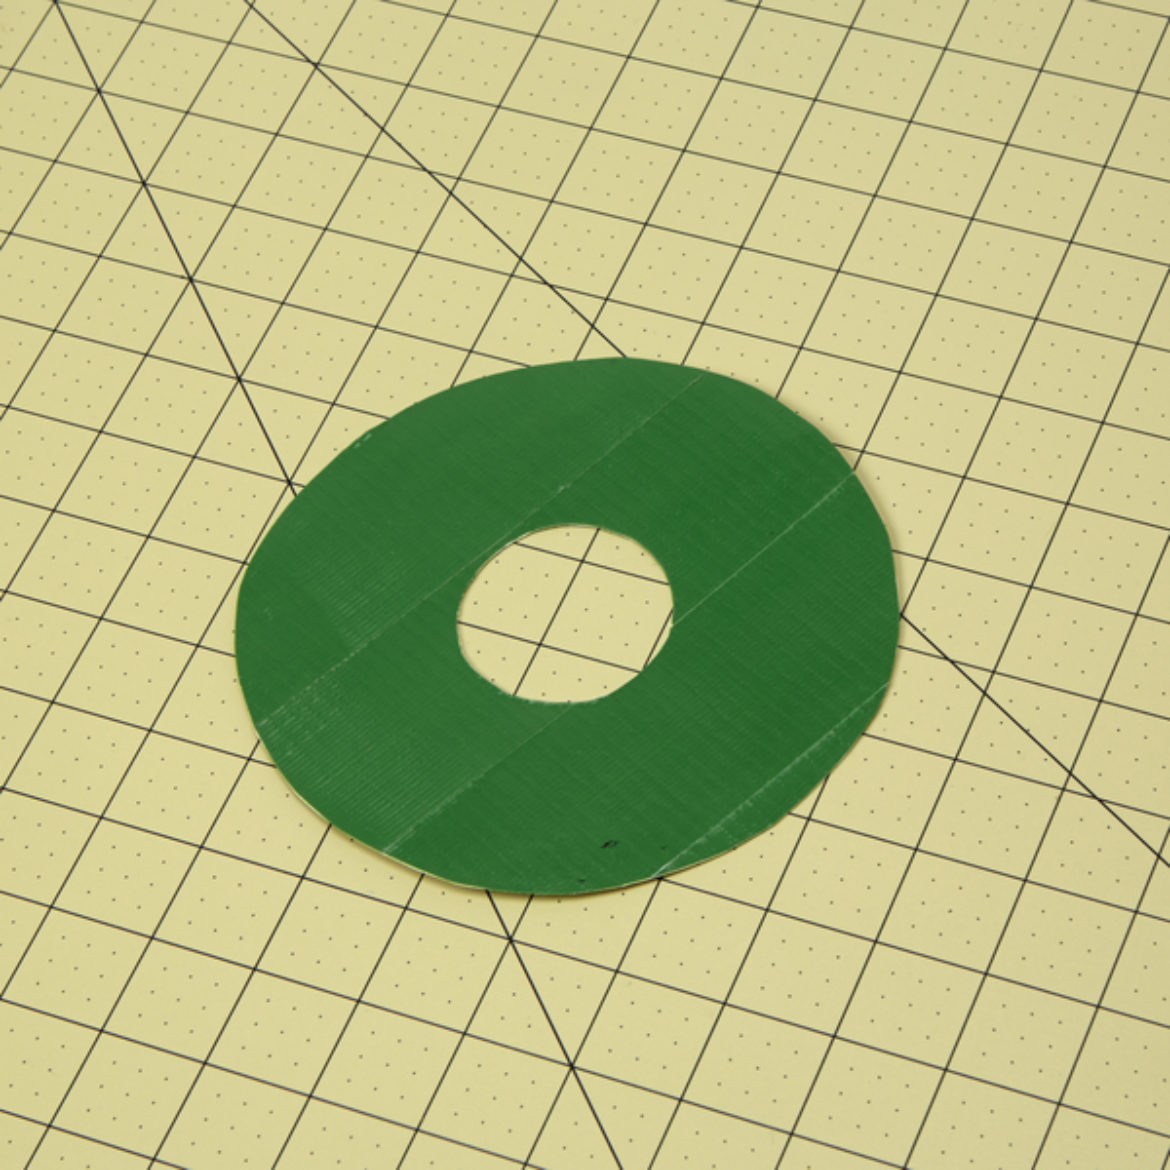 Donut shape from previous step covered in green Duck Tape